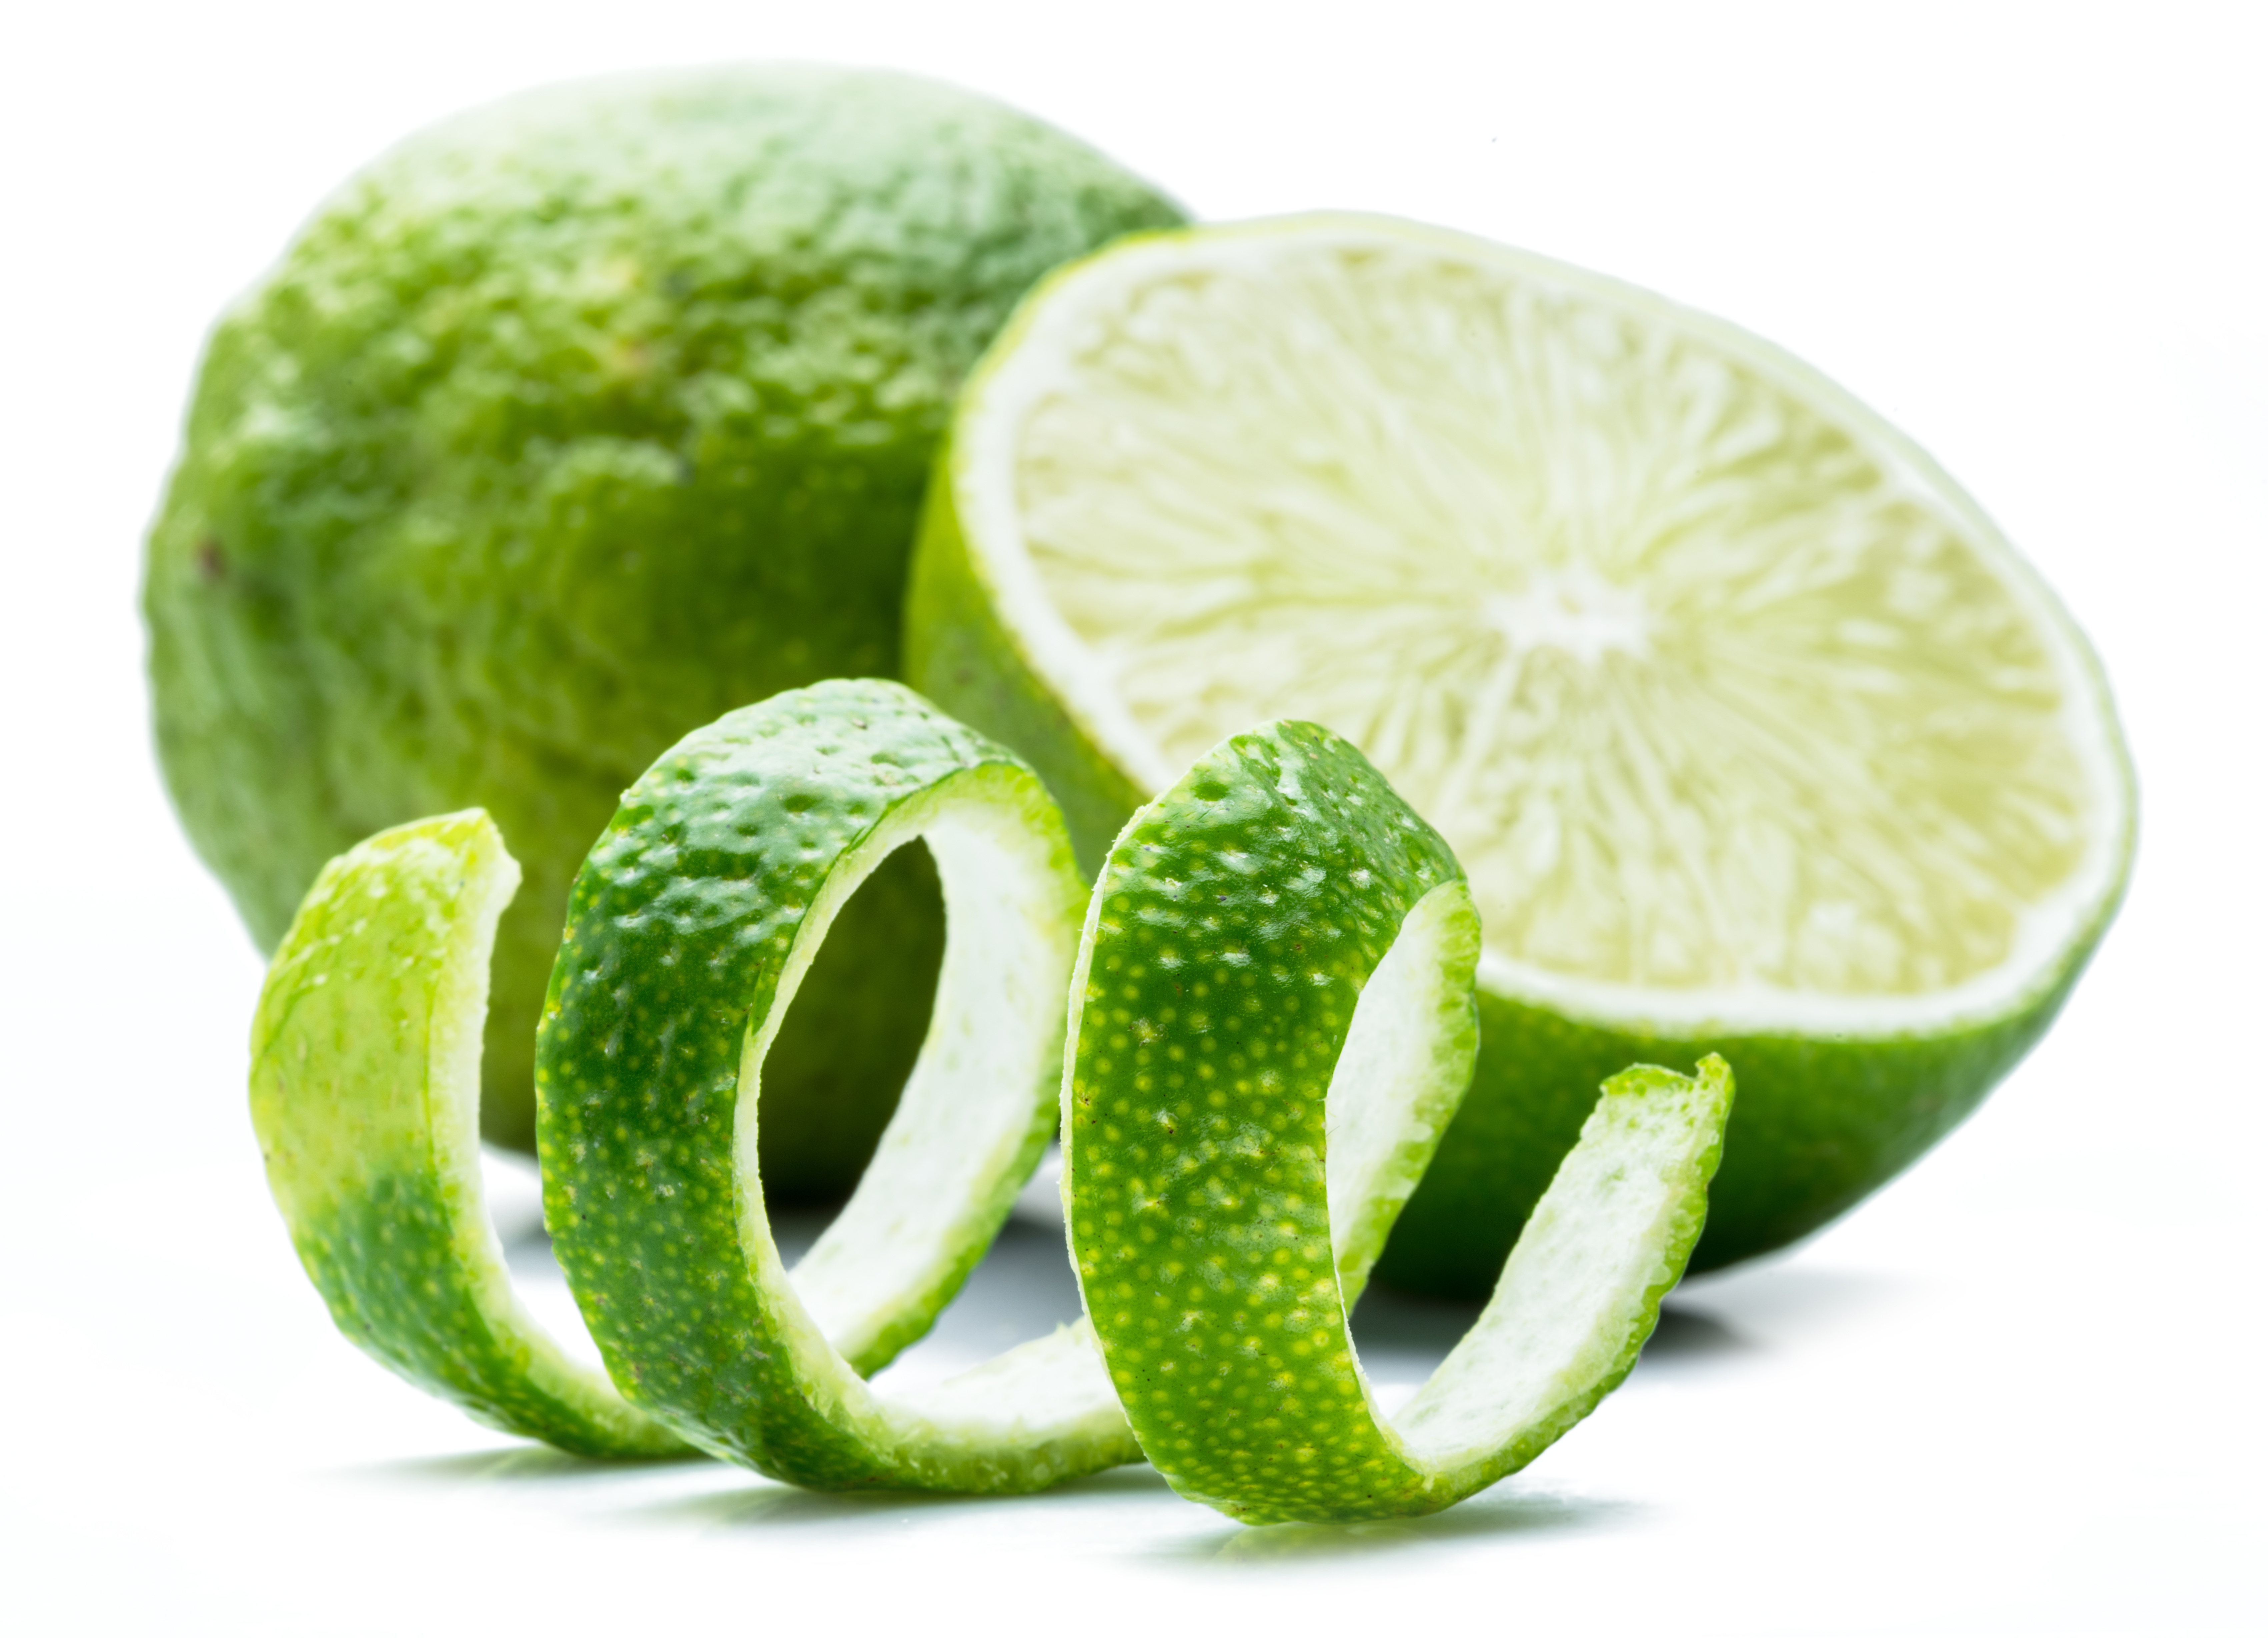 Ripe lime fruits on the white background.